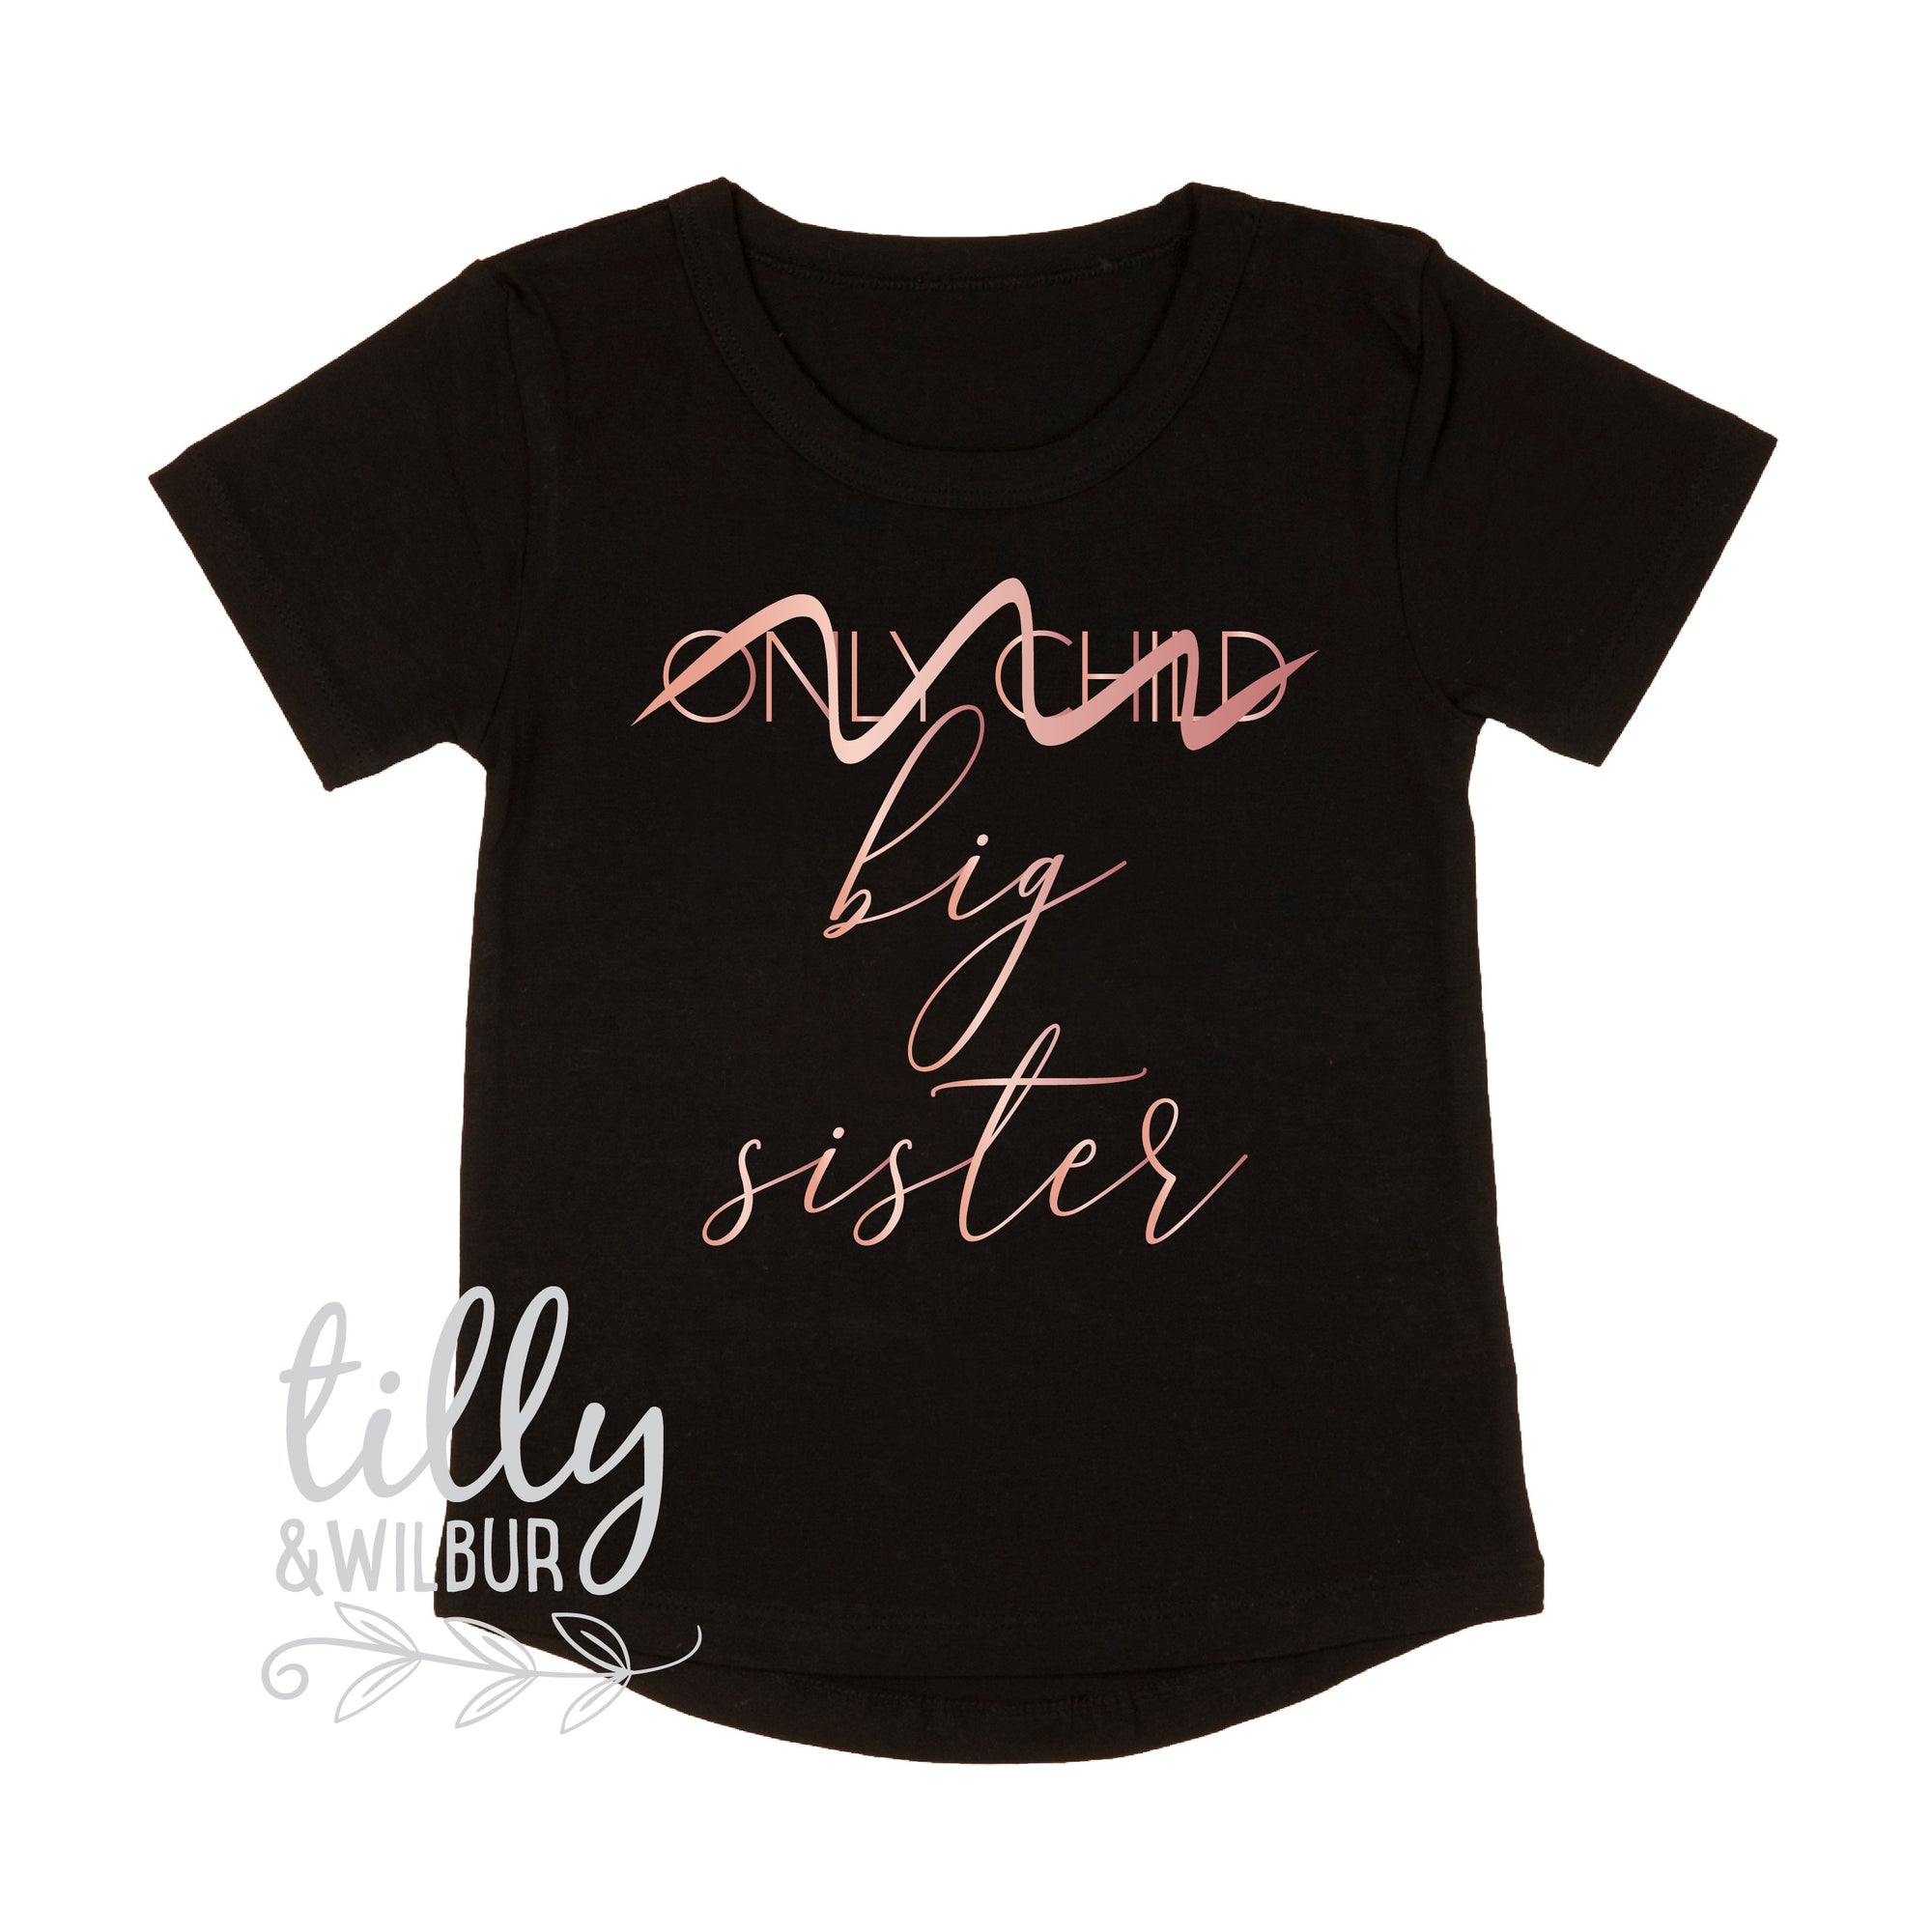 Only Child Big Sister T-Shirt, I'm Going To Be A Big Sister Shirt, Only Child No Longer, Big Sister Shirt, Sister Shirt, Sibling Shirt